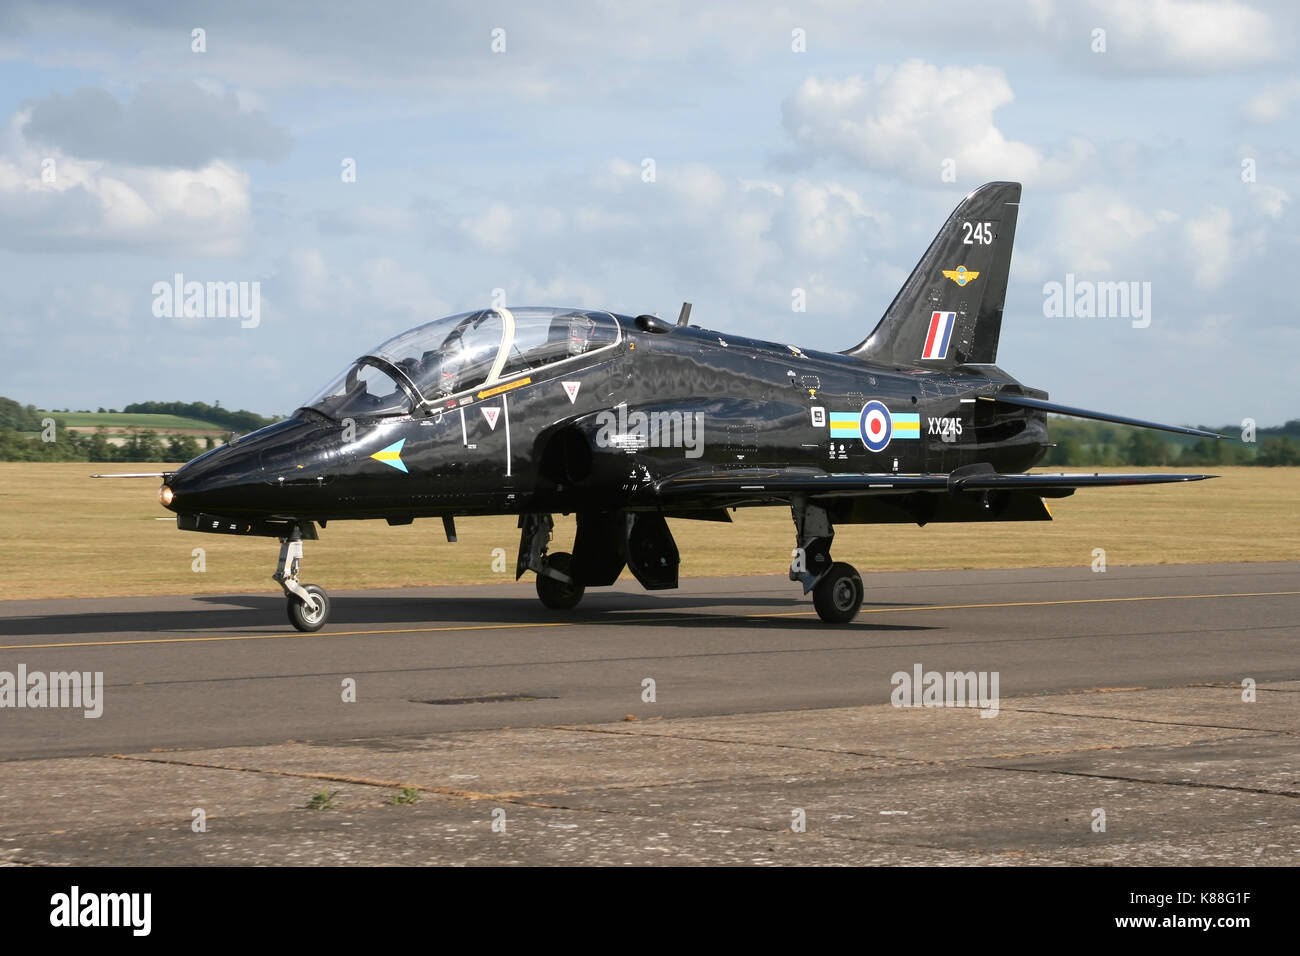 The 2011 RAF solo Hawk display pilot taxiing in after a display at Duxford, Flt Lt Juliette Fleming was the RAF's first official female display pilot. Stock Photo